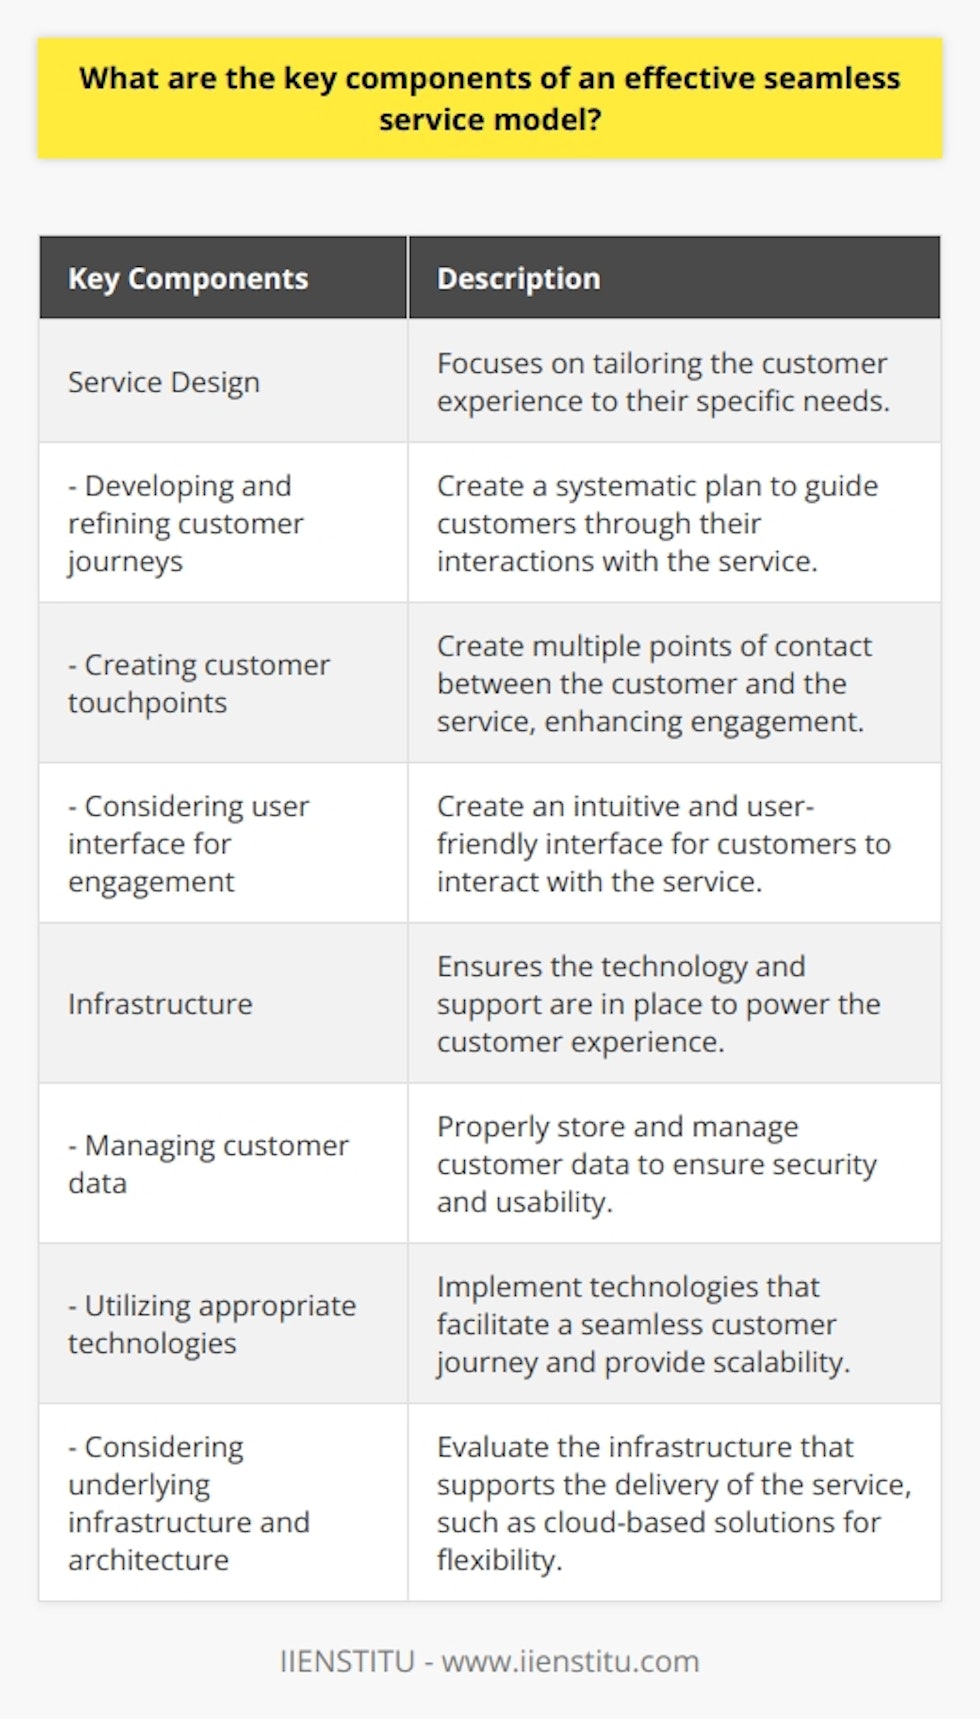 When discussing the key components of an effective seamless service model, two main aspects come to the forefront: service design and infrastructure. These elements are crucial for creating a high-quality customer experience that meets expectations.Service design is a vital component of an effective seamless service model as it focuses on tailoring the customer experience to their specific needs. In order to achieve this, it is important to consider the customer's perspective and behavior when developing the service. Taking a customer-centric approach helps to foster long-term relationships with customers. Key elements of service design include developing and continuously refining customer journeys, creating customer touchpoints, and carefully considering the user interface for engagement.The second key component is the infrastructure element of the service. It is essential to ensure that there is sufficient technology and support in place to power the customer experience. This includes considering how customer data is stored and managed, as well as the technologies used to facilitate the customer journey. Additionally, the underlying infrastructure and architecture that support the service delivery should be carefully considered. Cloud-based solutions, for example, provide scalability and flexibility to the service model, enhancing its effectiveness.Ultimately, an effective seamless service model aims to provide a customer experience that is tailored to their individual needs, while also providing an efficient and effective platform to serve customers. By effectively employing service design and managing the underlying infrastructure, organizations can not only enhance the short-term customer experience but also foster long-term satisfaction and loyalty.In conclusion, the key components of an effective seamless service model are service design and infrastructure. Service design focuses on creating a high-quality customer experience tailored to their needs, while infrastructure ensures that the necessary technology and support are in place to power the service. By prioritizing these components, organizations can improve the customer experience in both the short and long term, ultimately leading to increased customer satisfaction and loyalty.